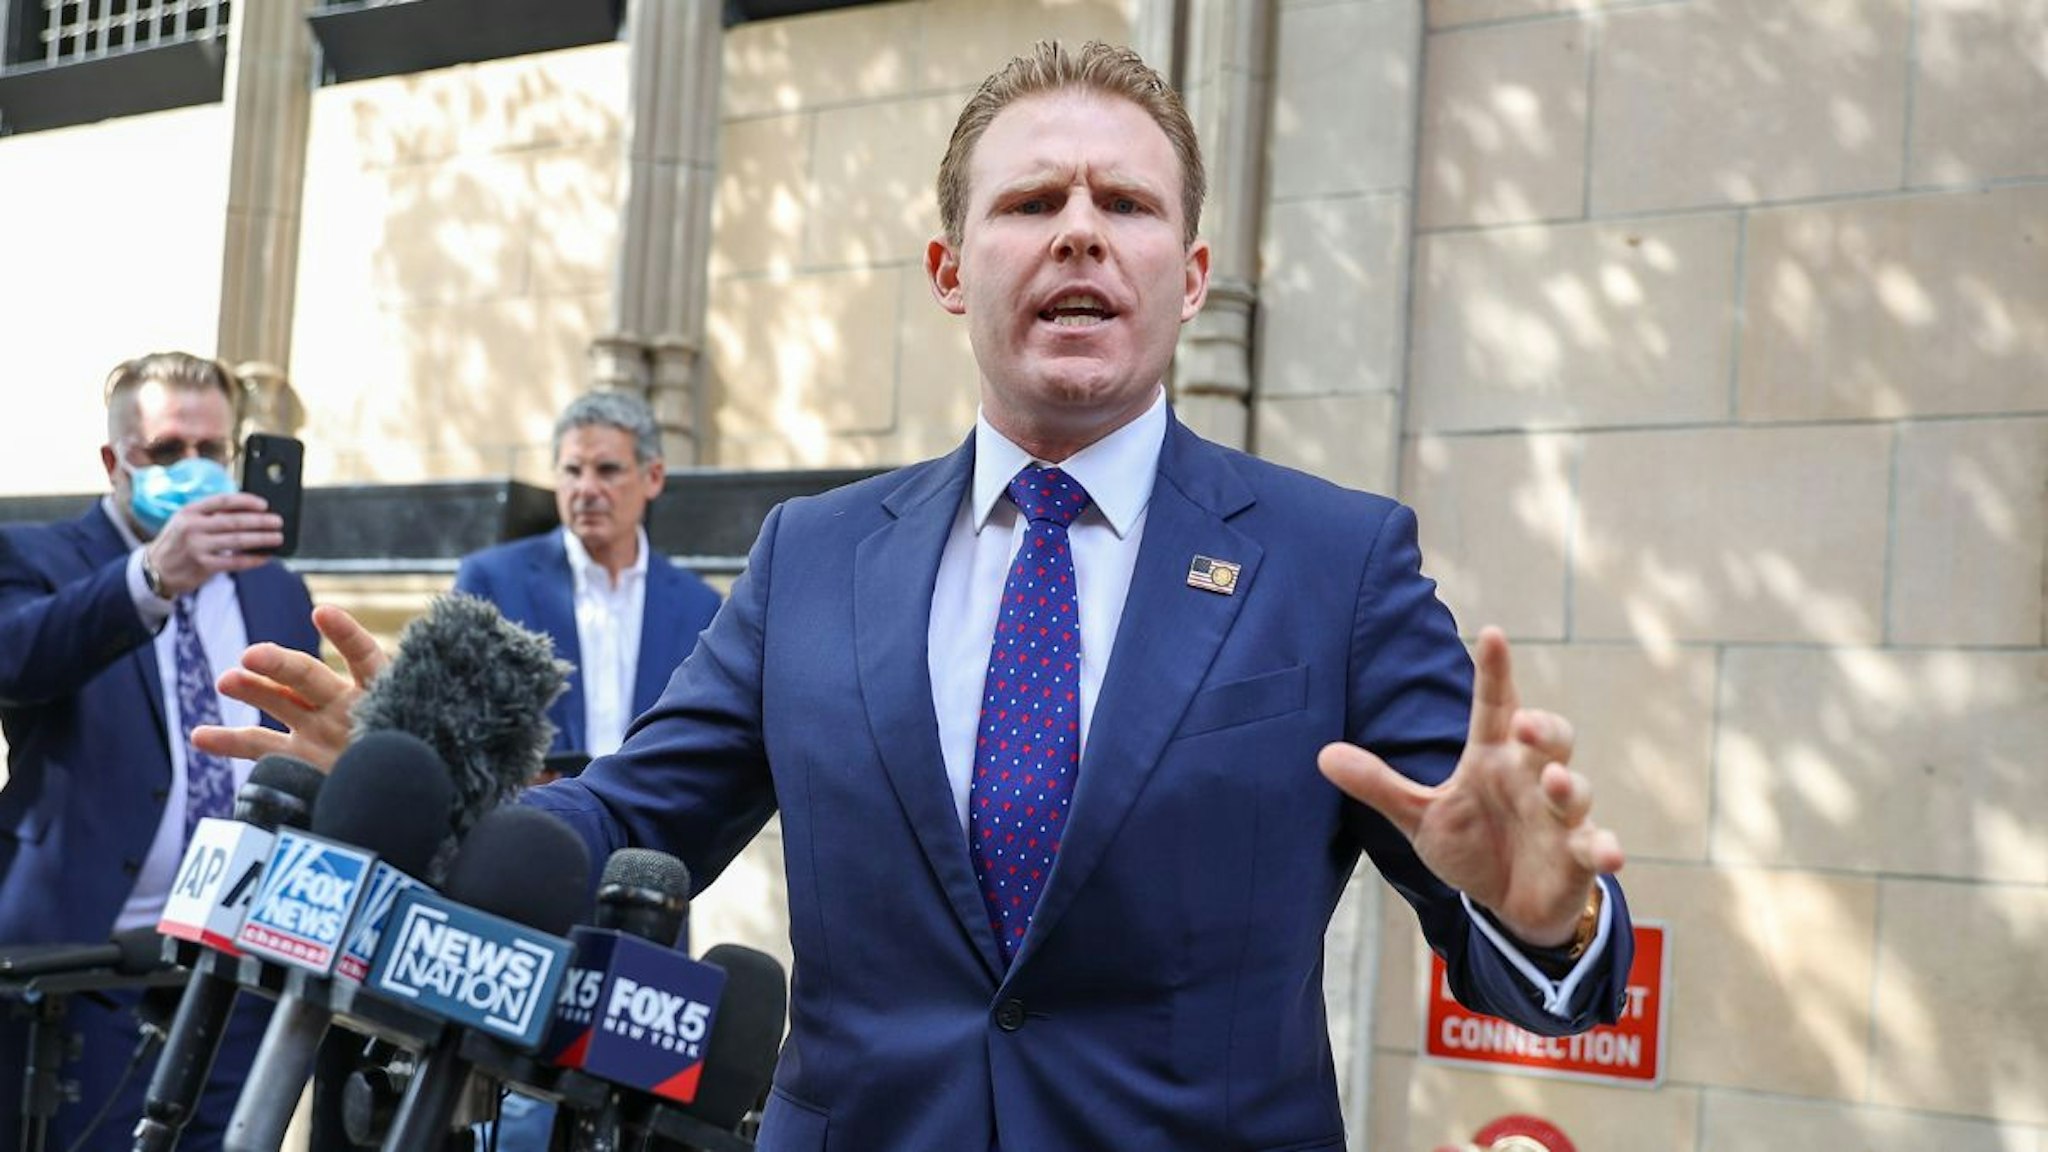 Andrew Giuliani speaks to the members of press outside the apartment of his father Rudy Giuliani, the former President Donald Trump's personal attorney and the former mayor of New York City, after FBI has executed a search warrant in Manhattan of New York City, United States on April 28, 2021.